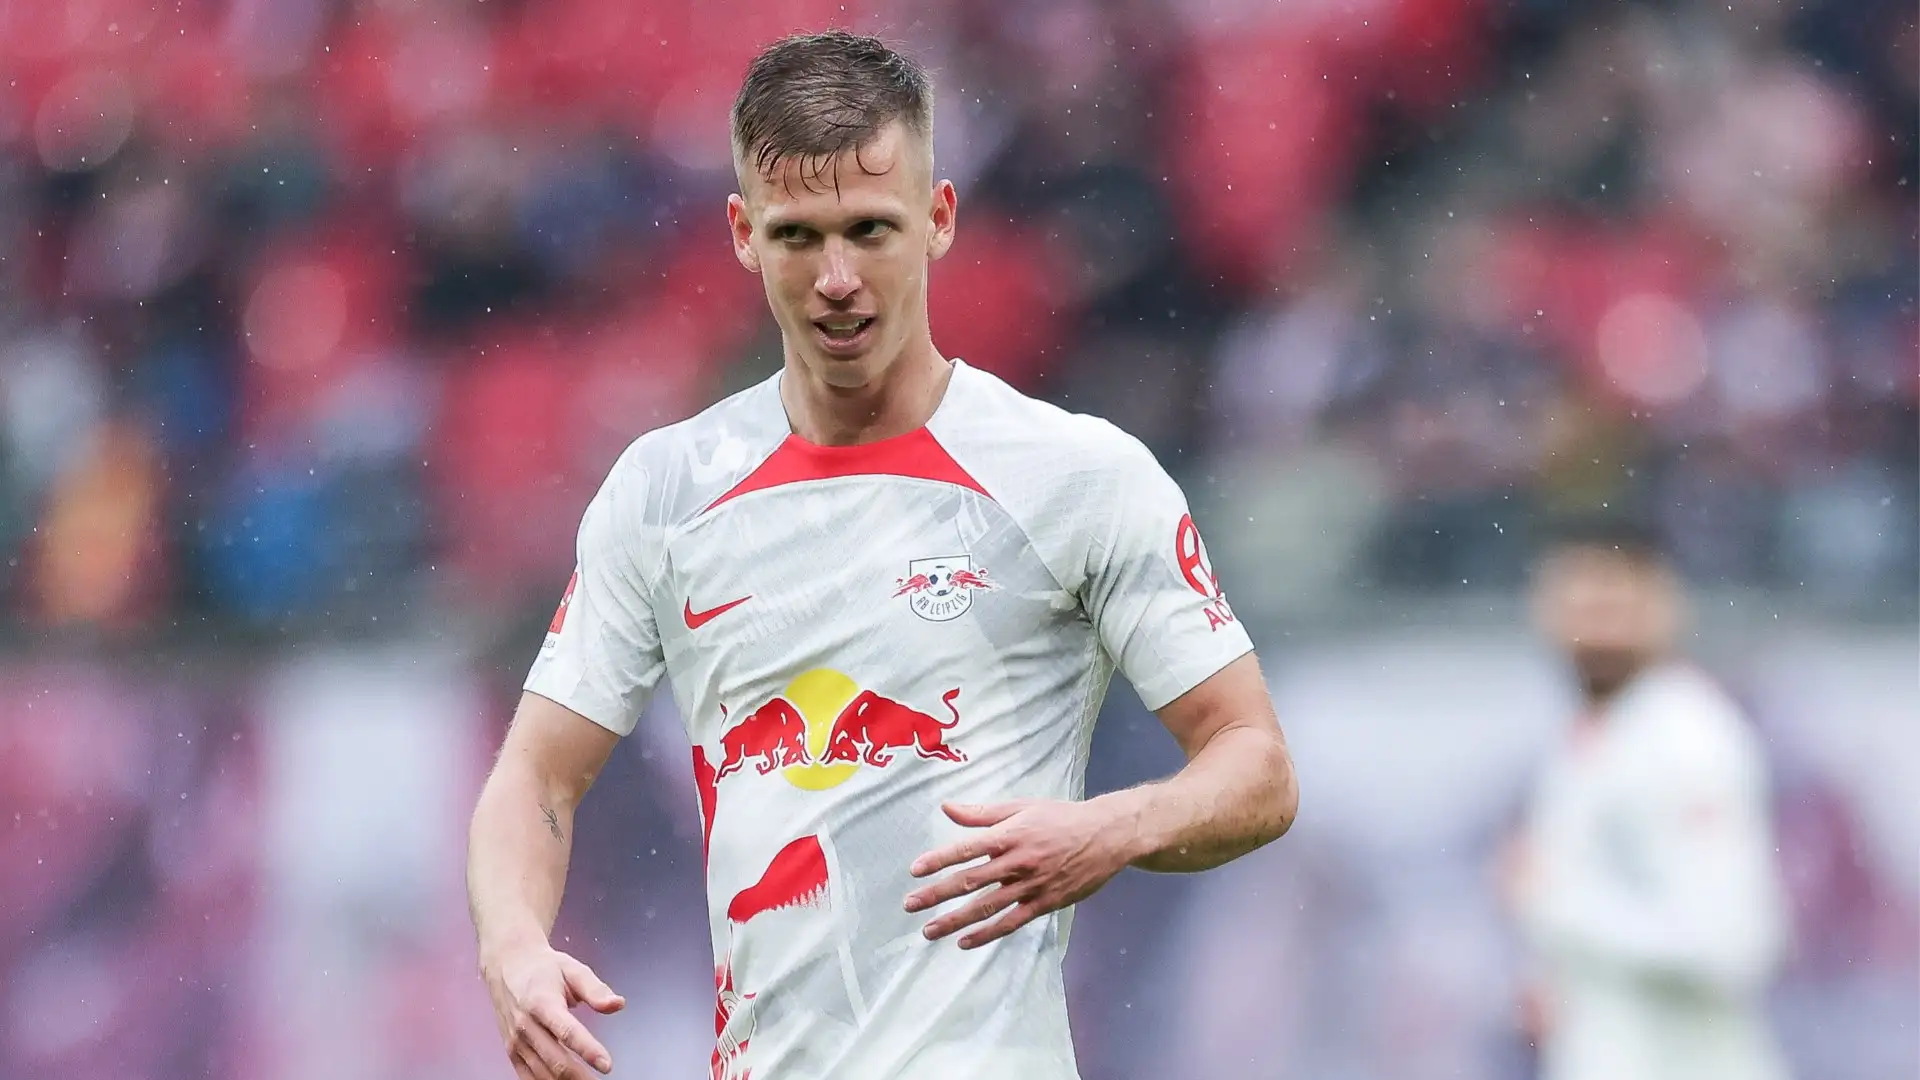 Man City to enter transfer battle with PSG & Bayern Munich as European giants line up for €60m-rated RB Leipzig star Dani OlmoMan City to enter transfer battle with PSG & Bayern Munich as European giants line up for €60m-rated RB Leipzig star Dani Olmo